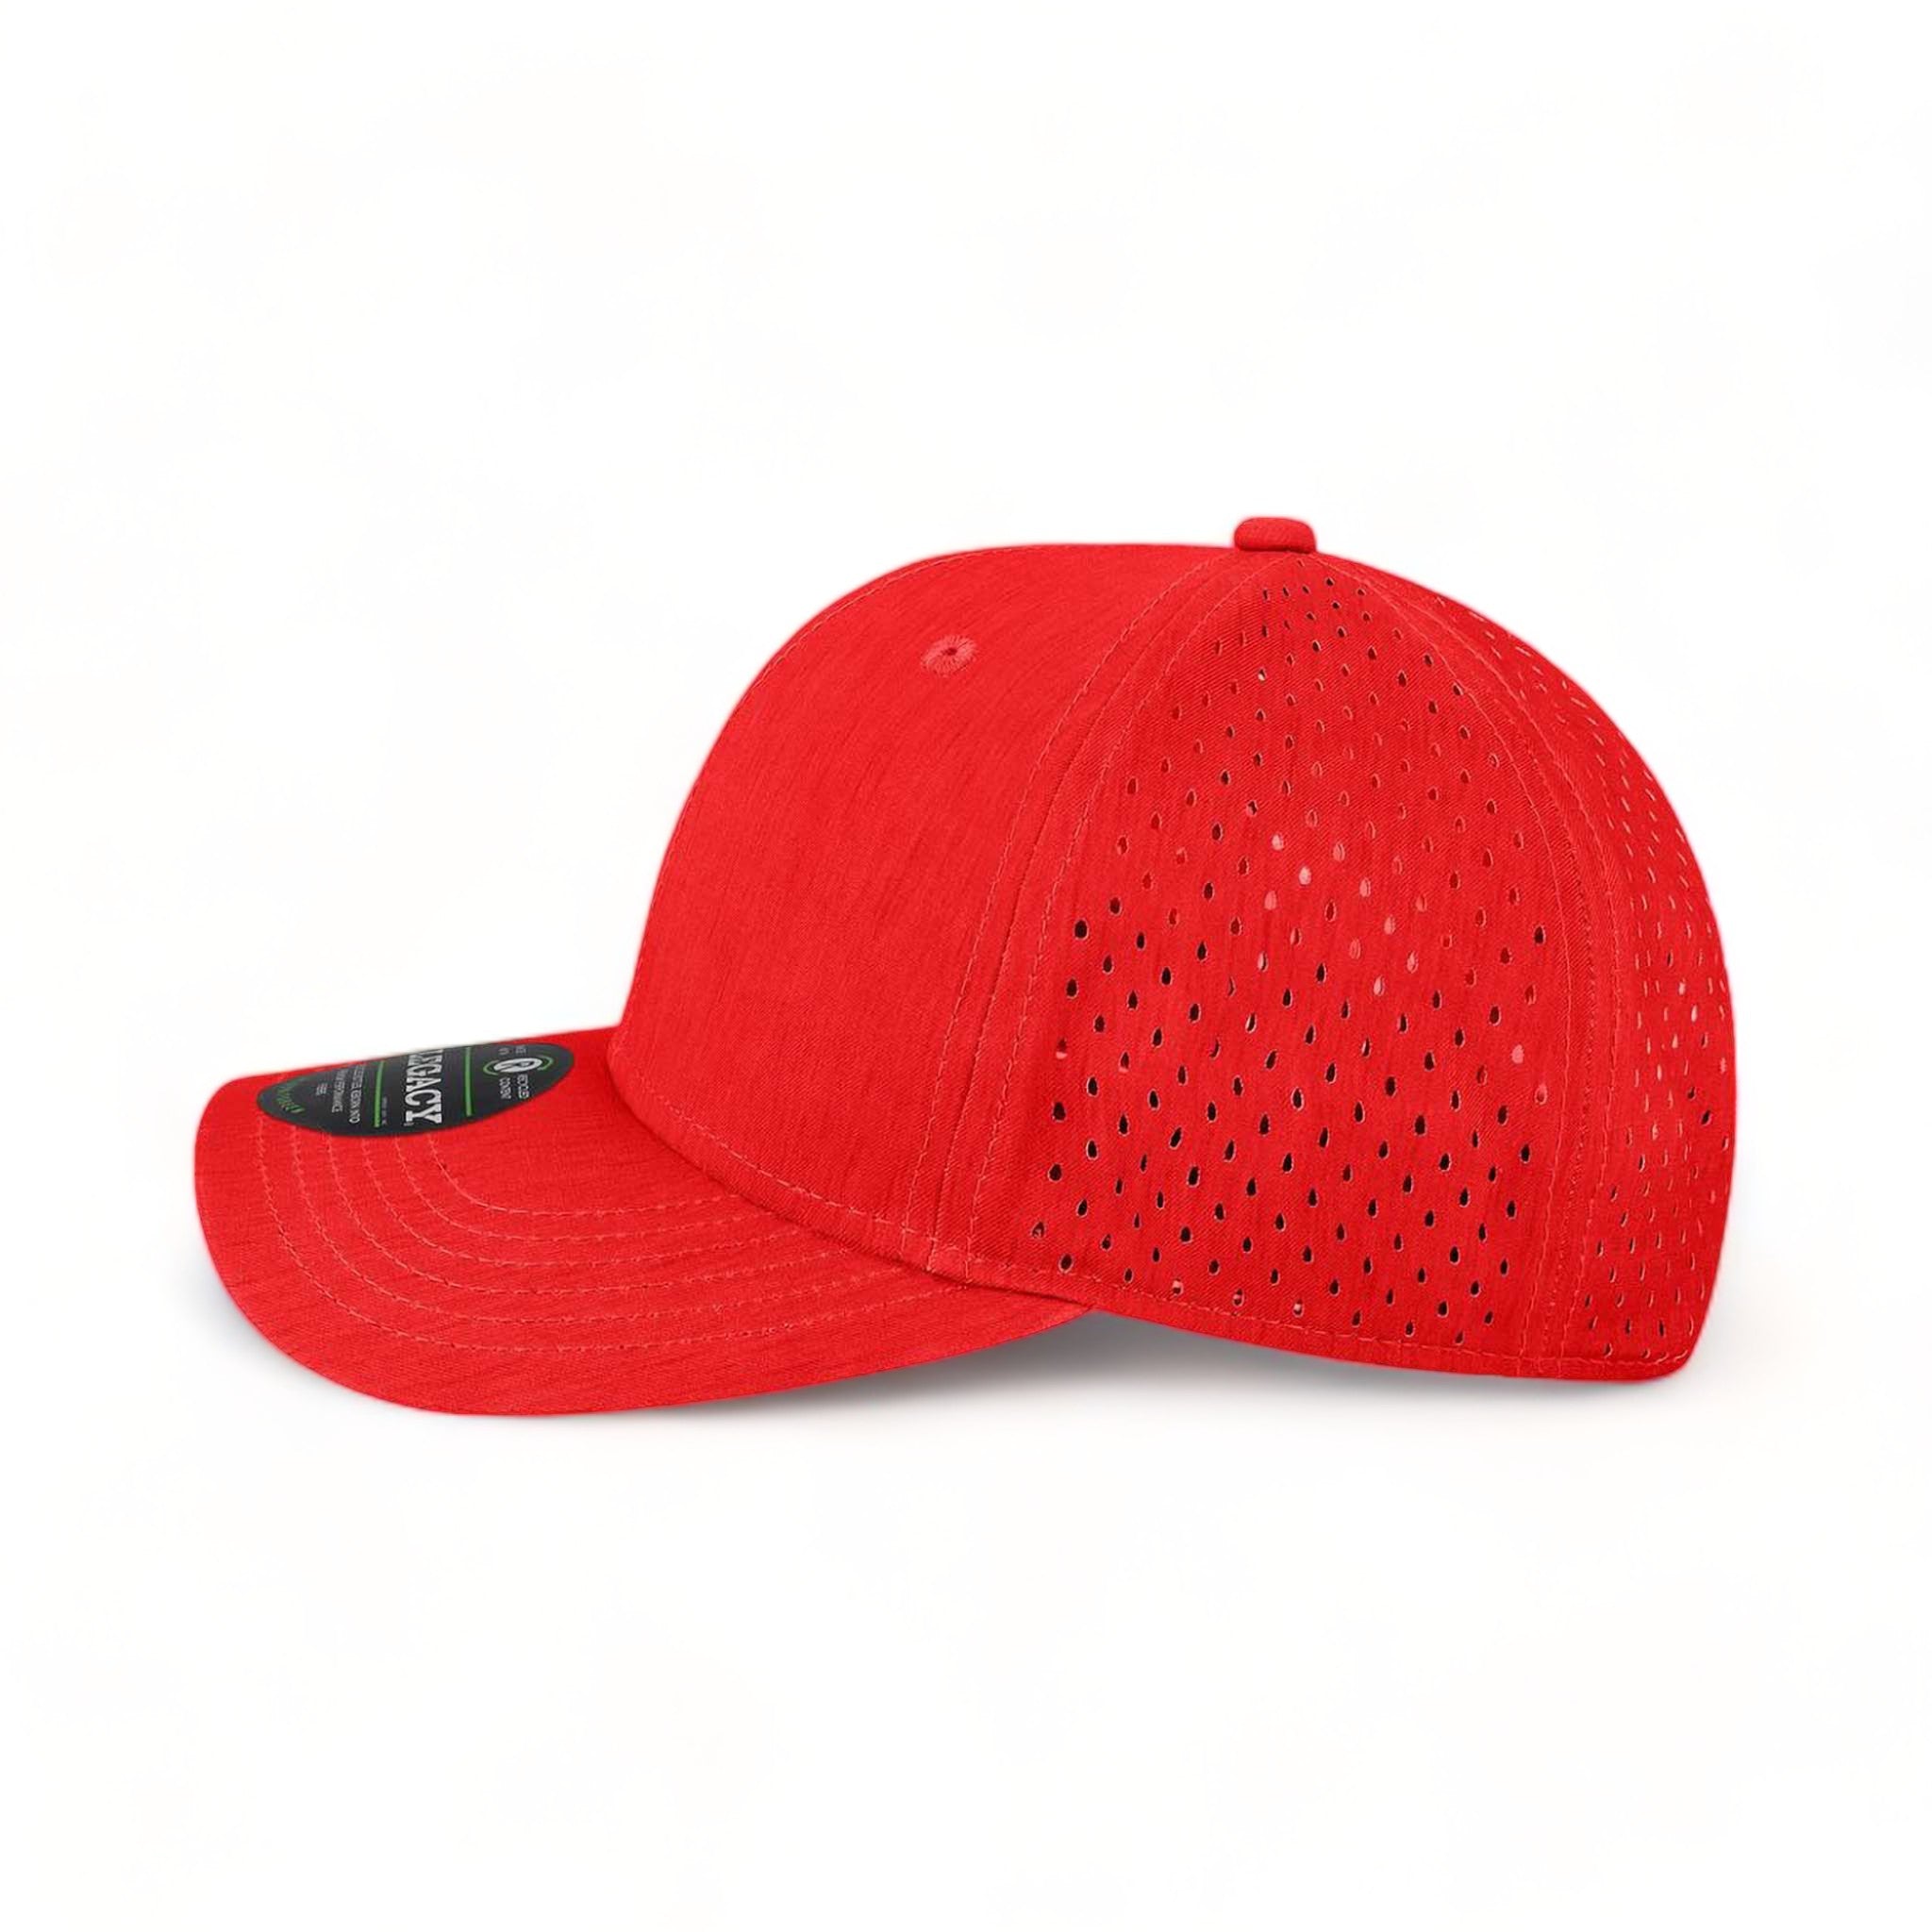 Side view of LEGACY REMPA custom hat in eco scarlet red